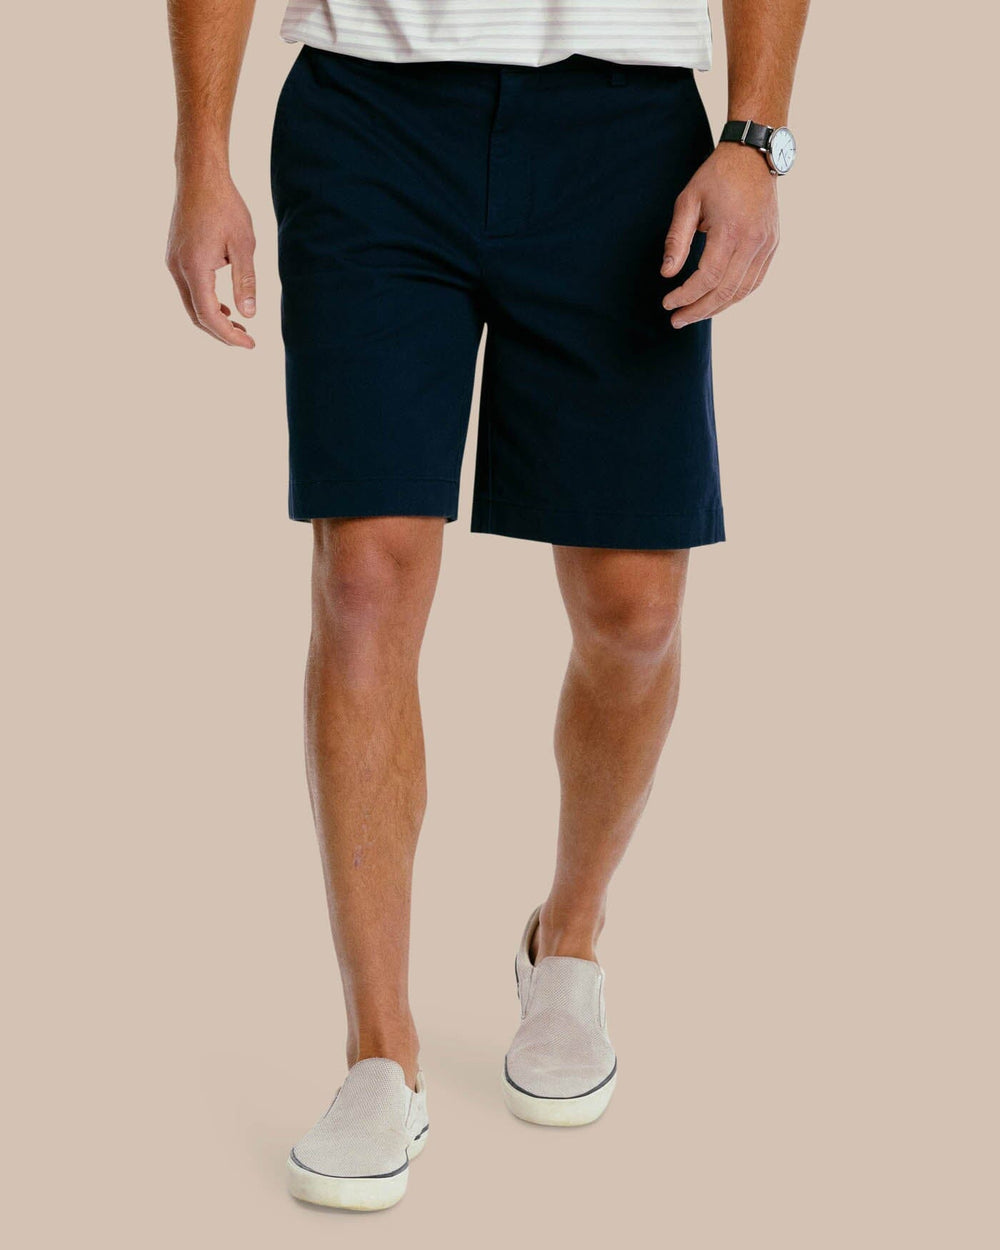 The front view of the Men's New Channel Marker 9 Inch Short by Southern Tide - True Navy